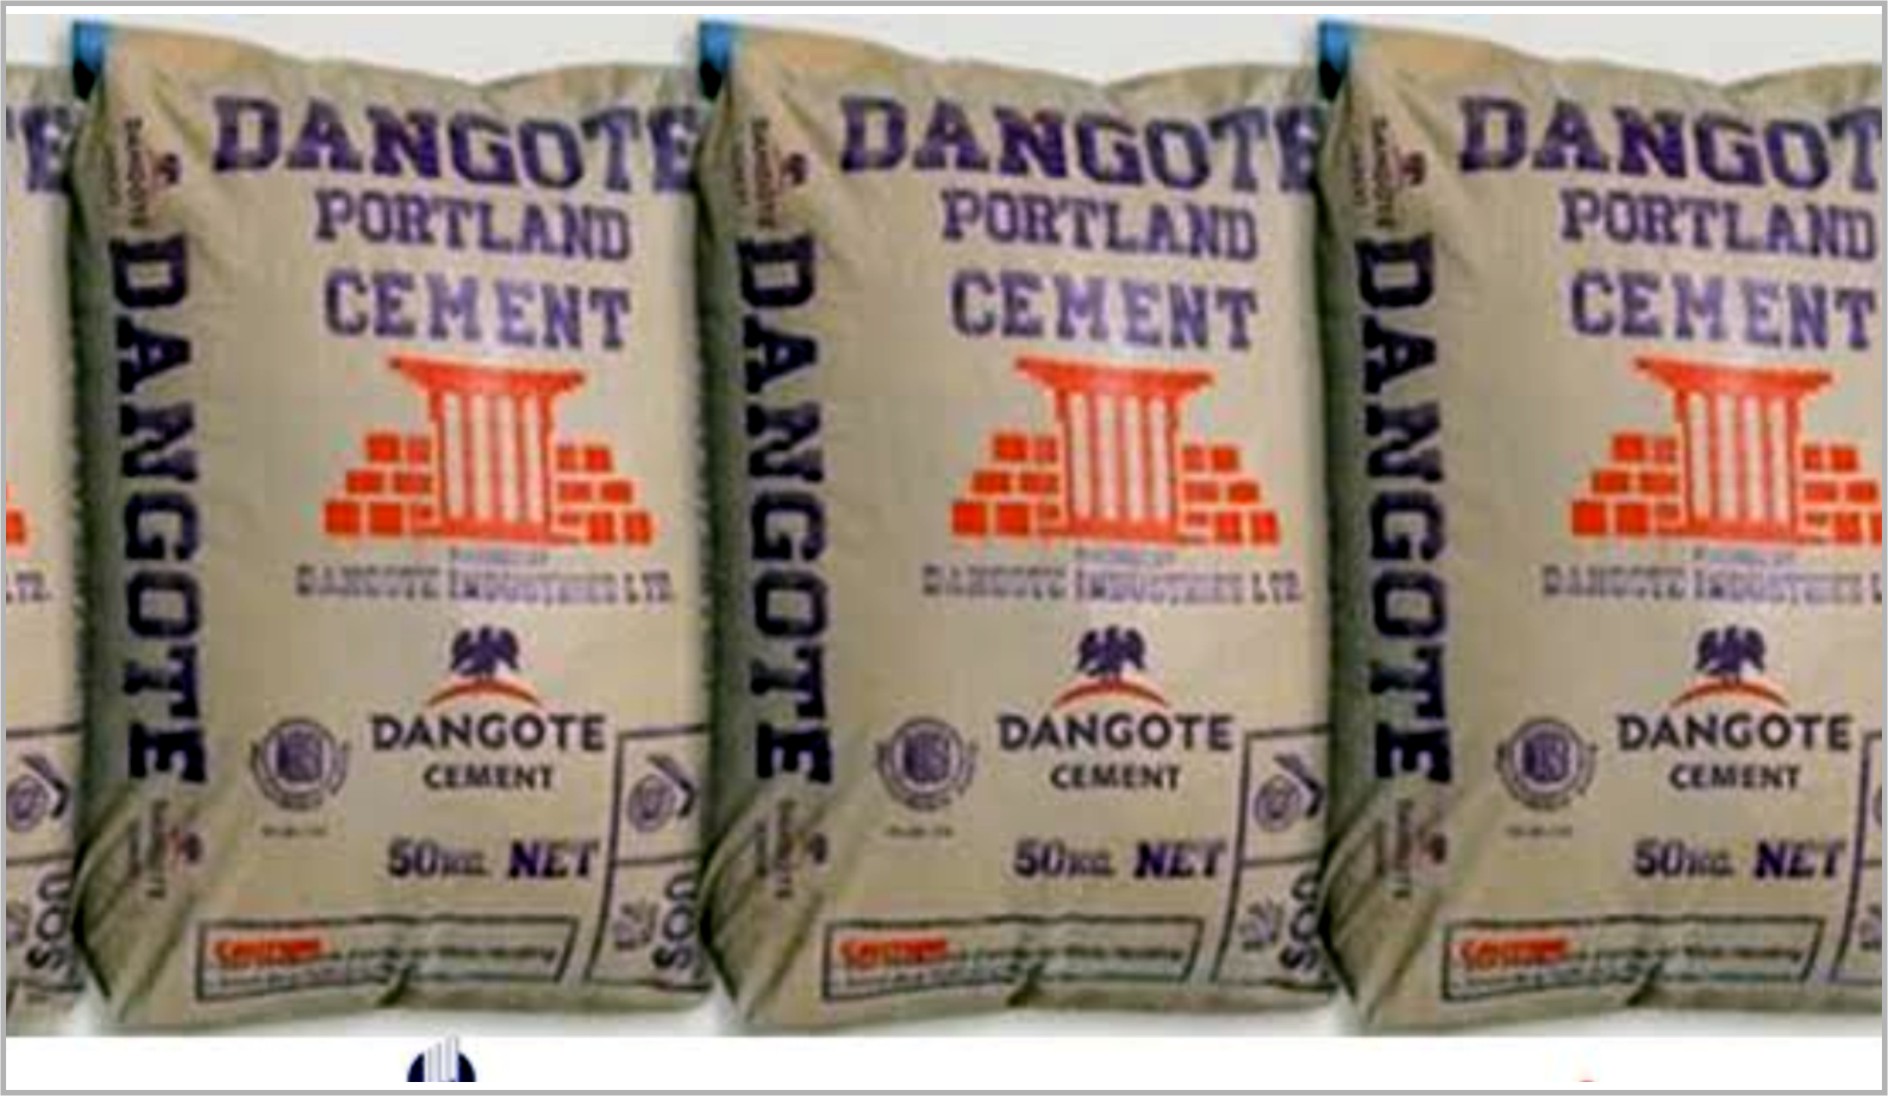 5 Reasons DANGOTE Cement Is No 1 Choice Of Builders City People Magazine